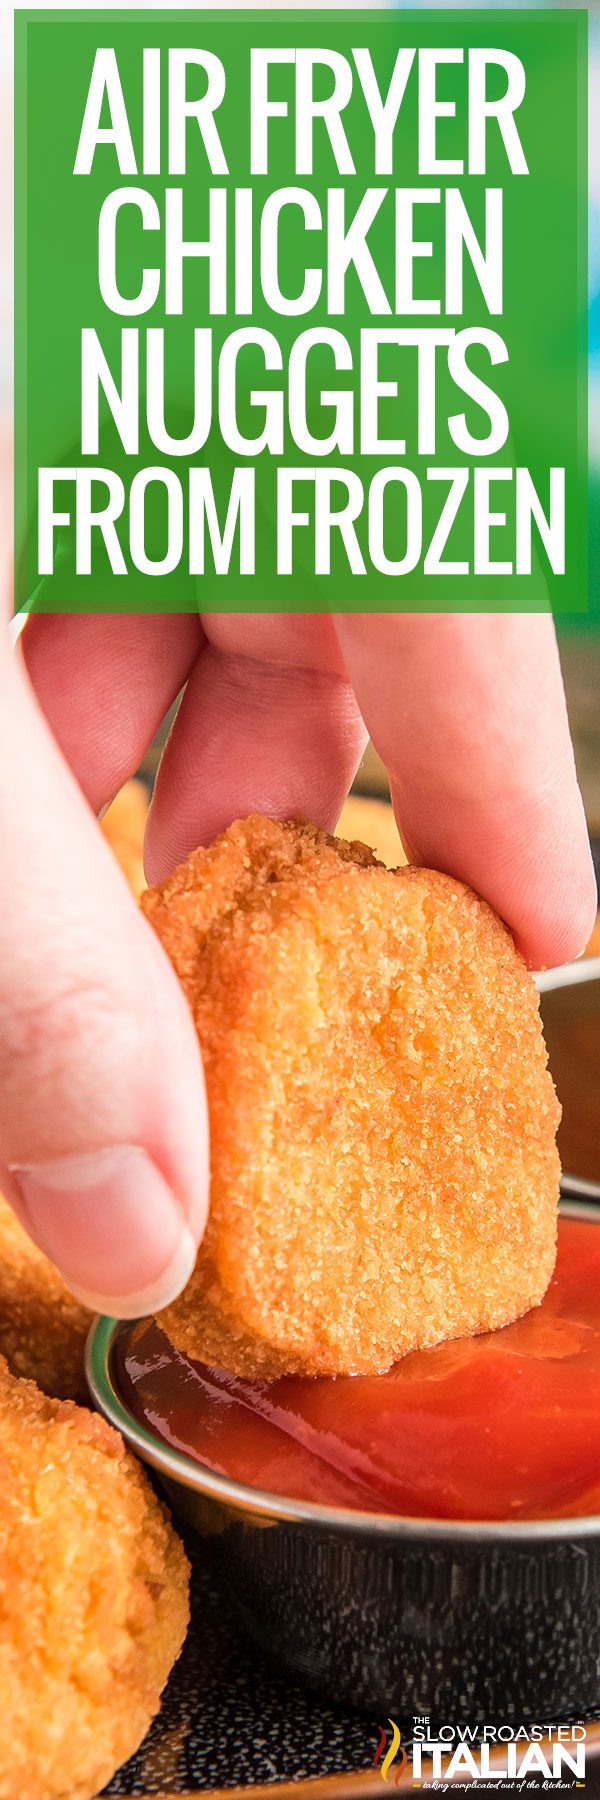 Air Fryer Chicken Nuggets (from Frozen) dipping in sauce